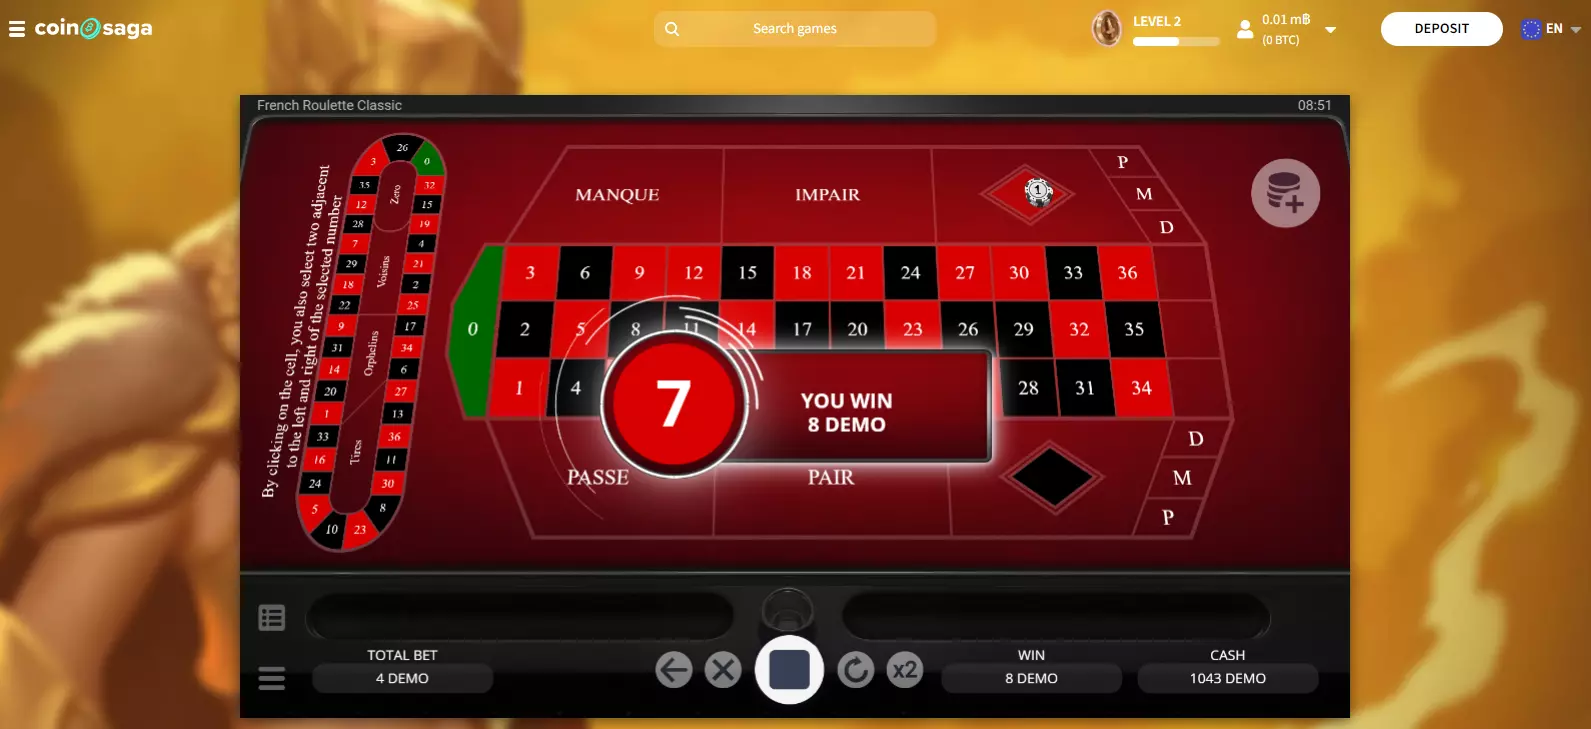 French Roulette Casino Game Bets